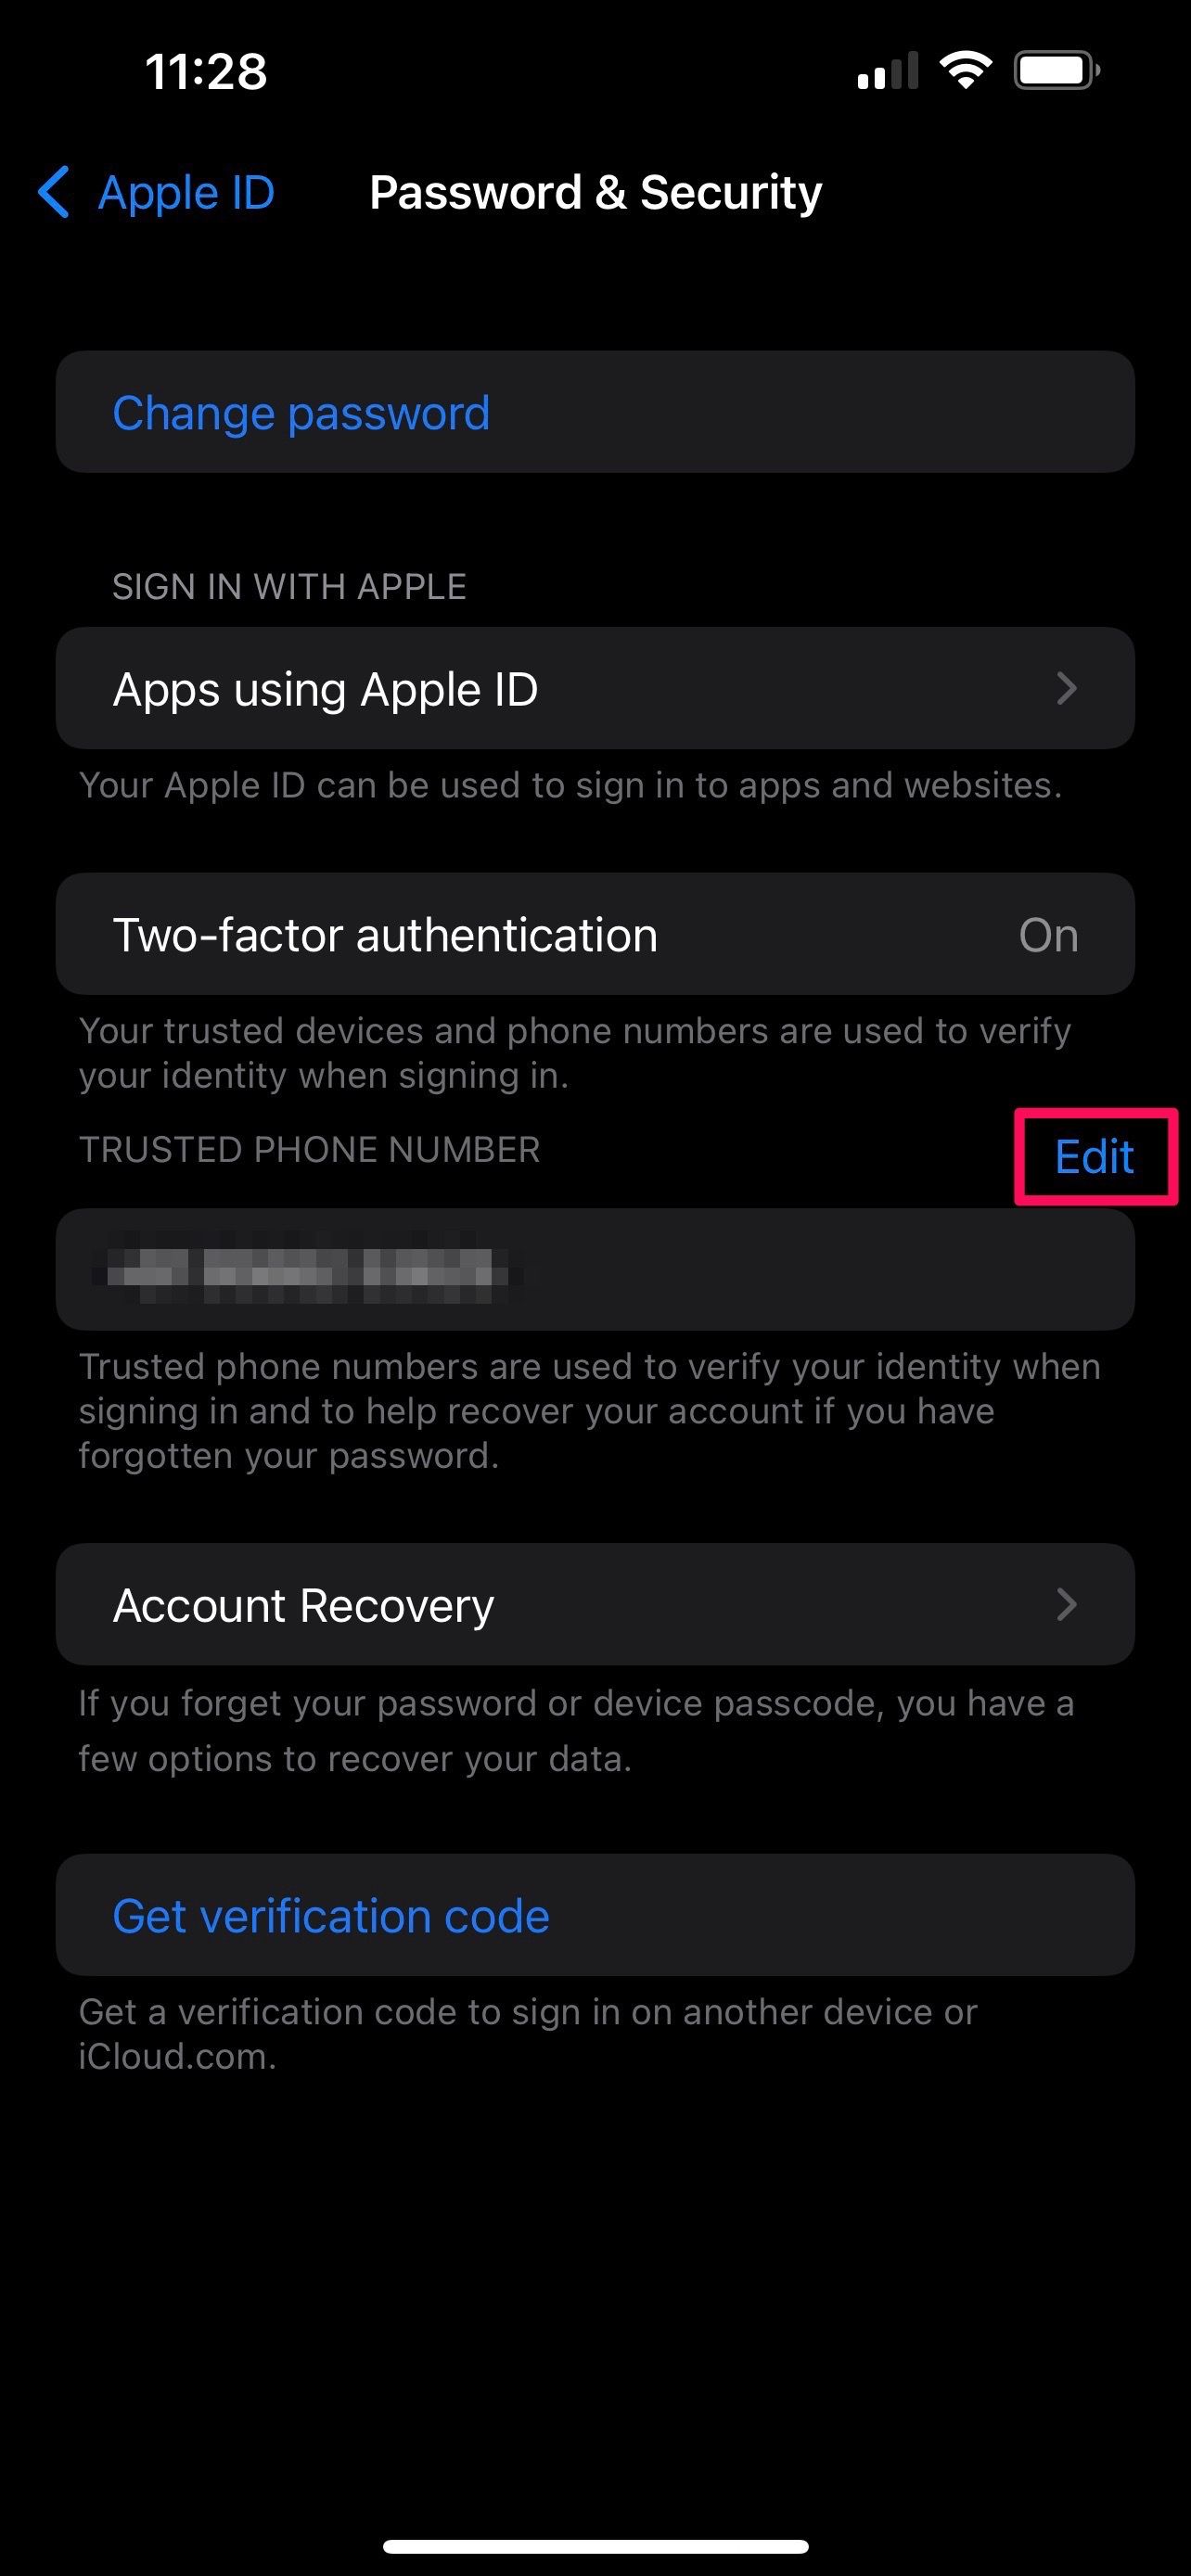 Password and Security settings in iOS